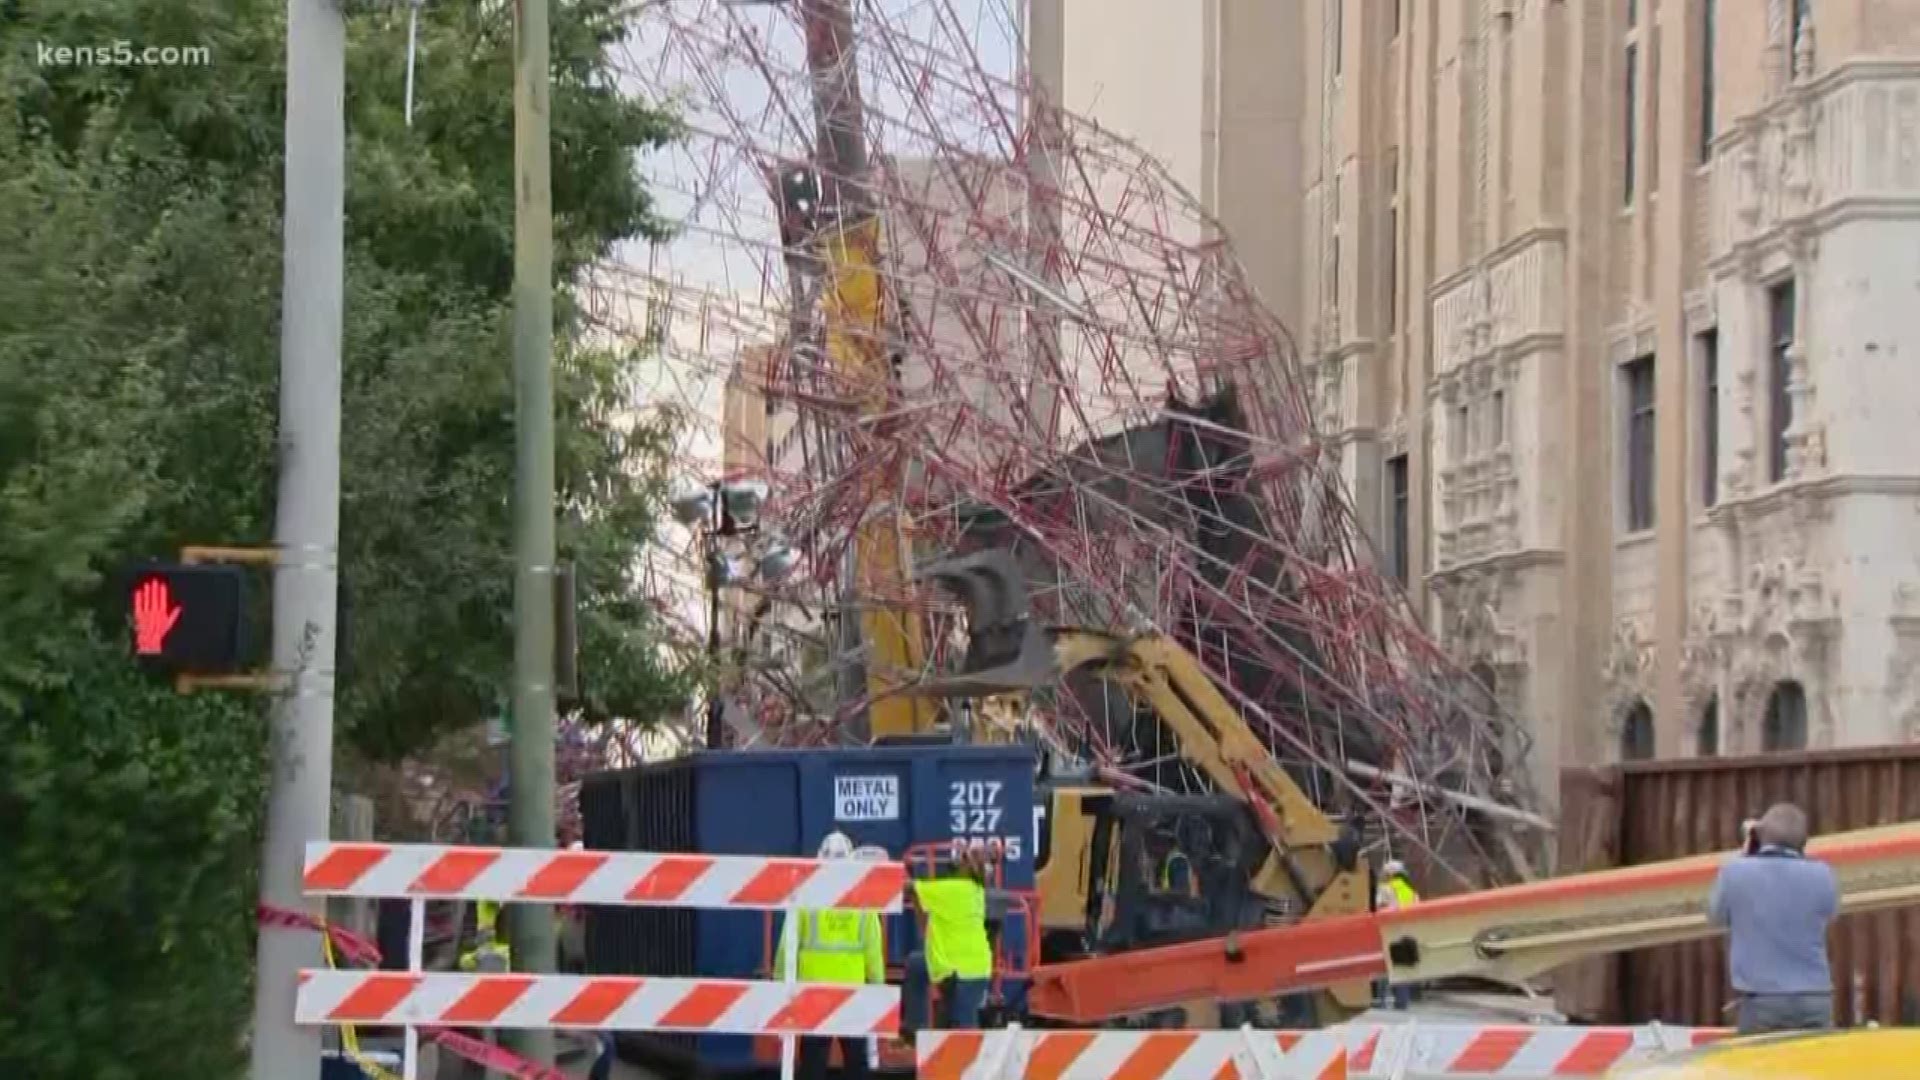 A downtown San Antonio street is still blocked by scaffolding brought down by sudden storms that moved through the city Thursday night.